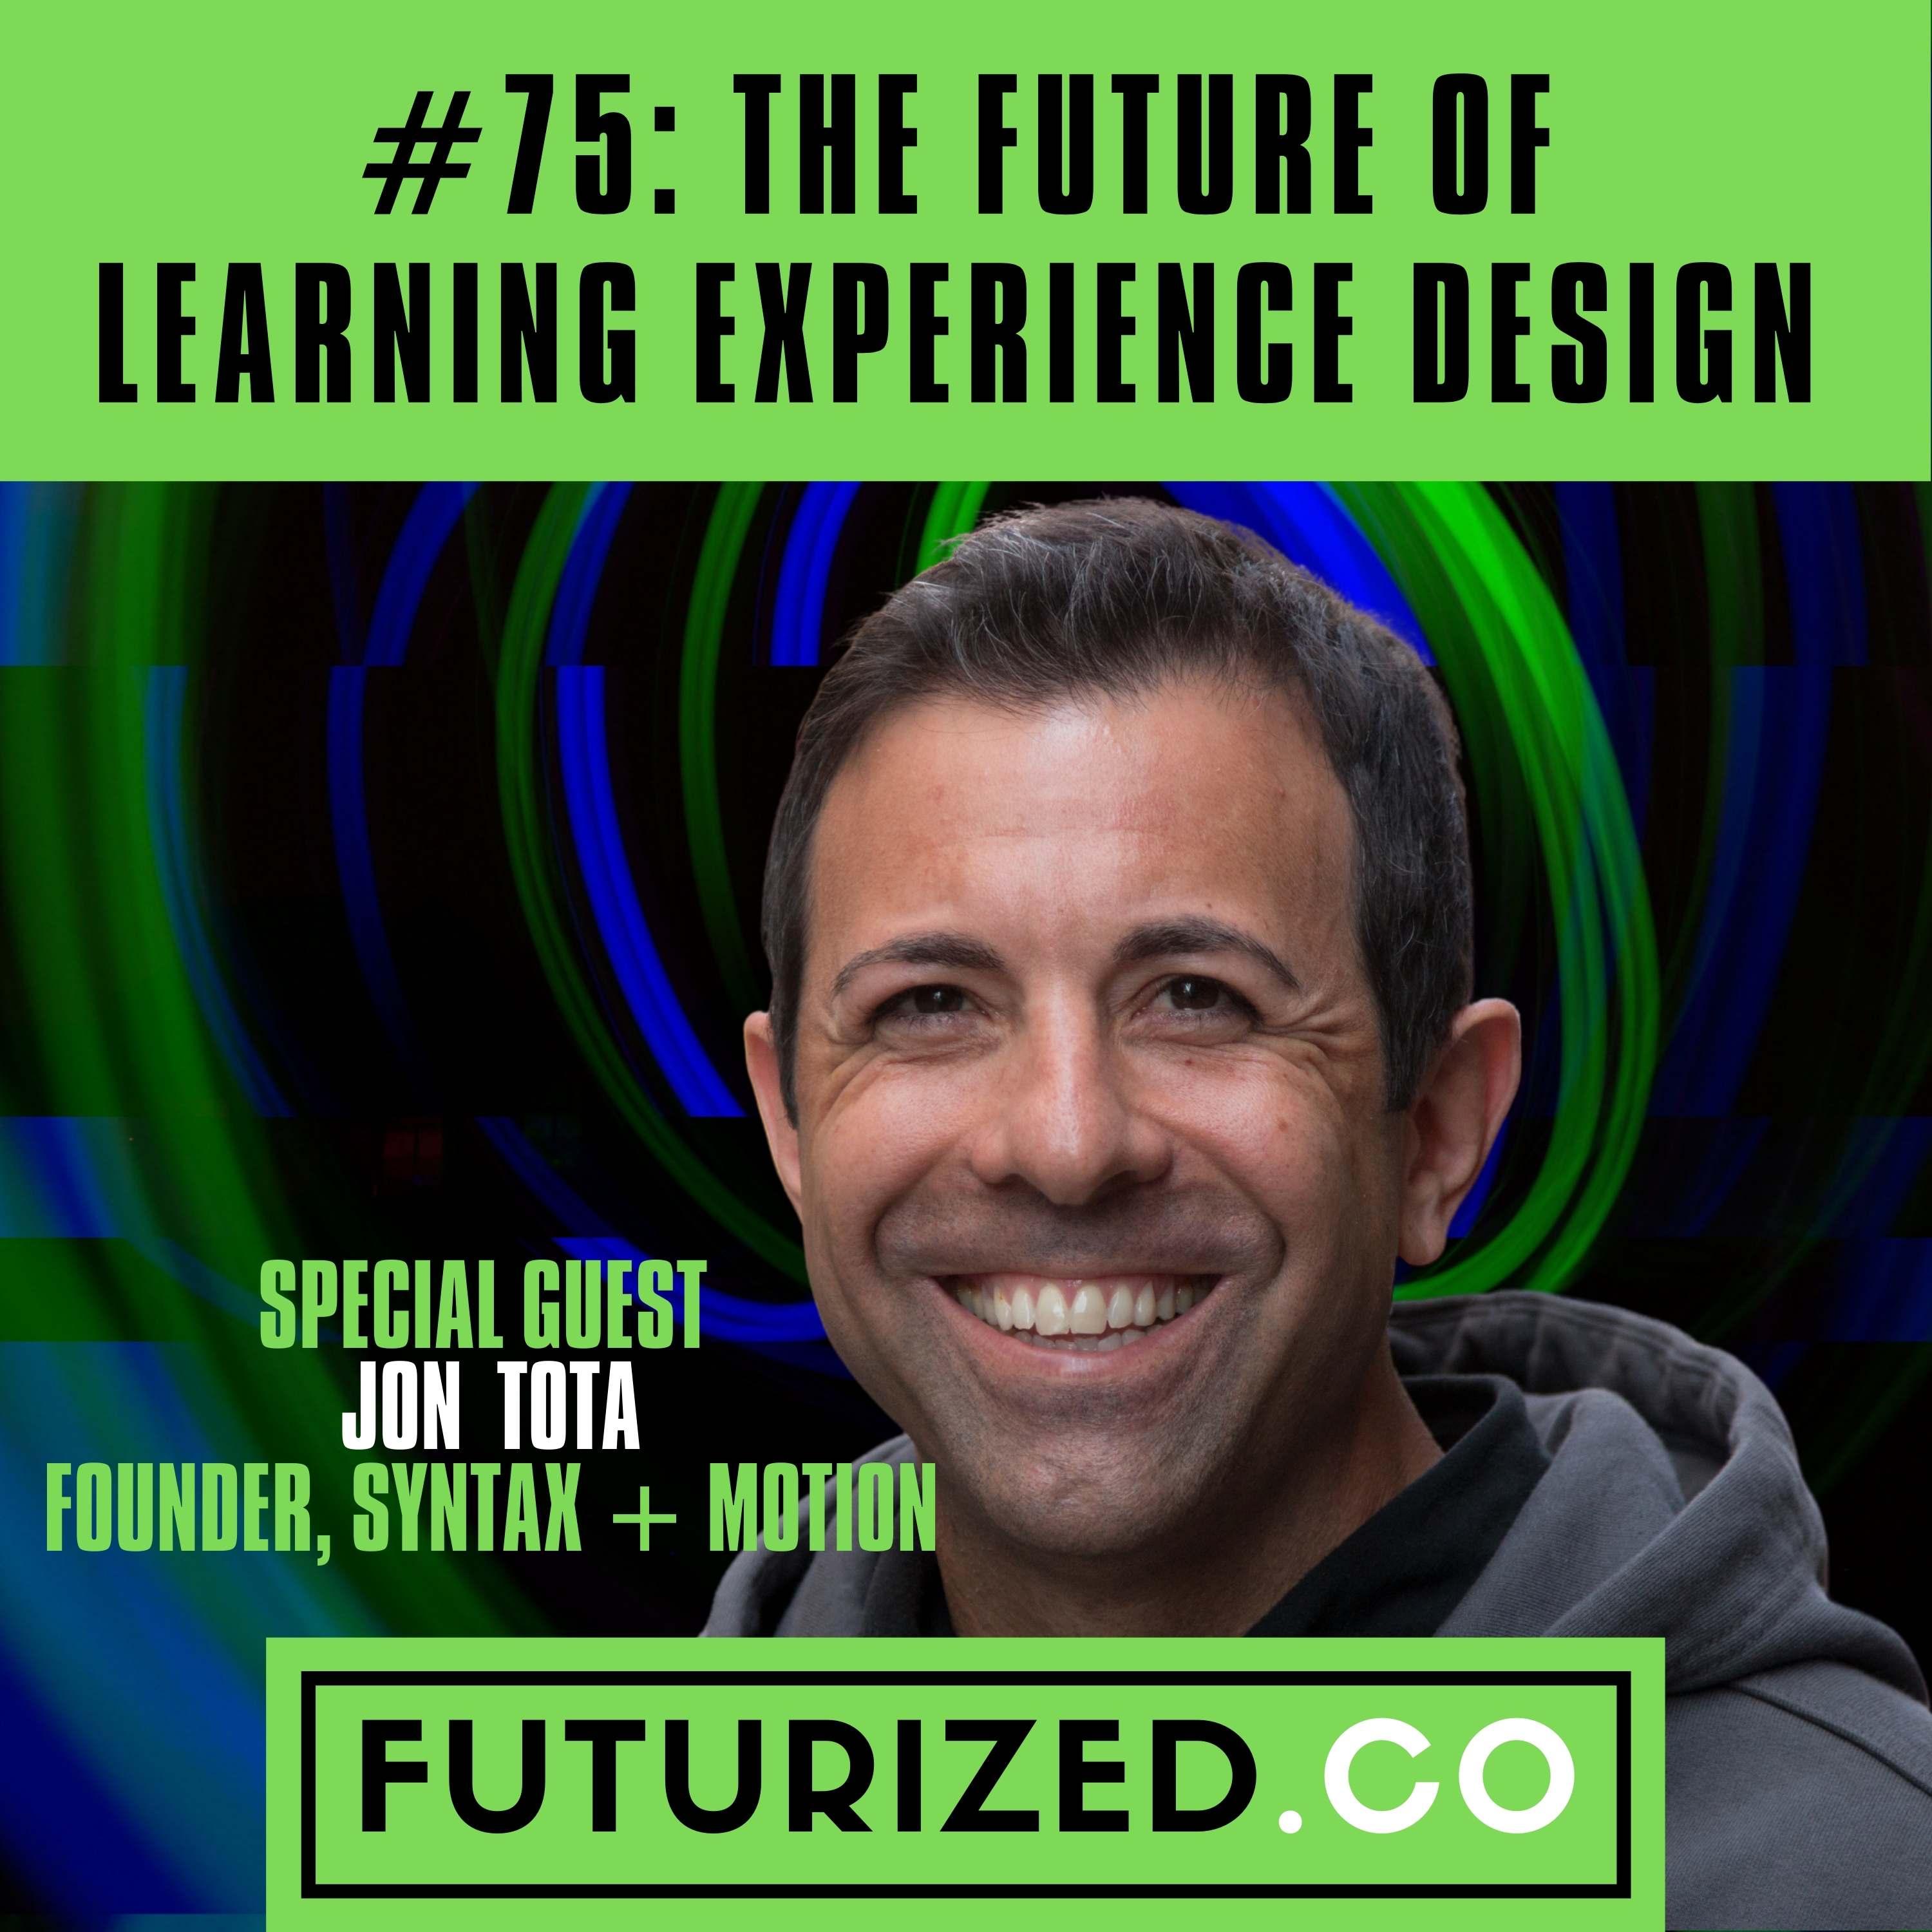 The future of learning experience design Image